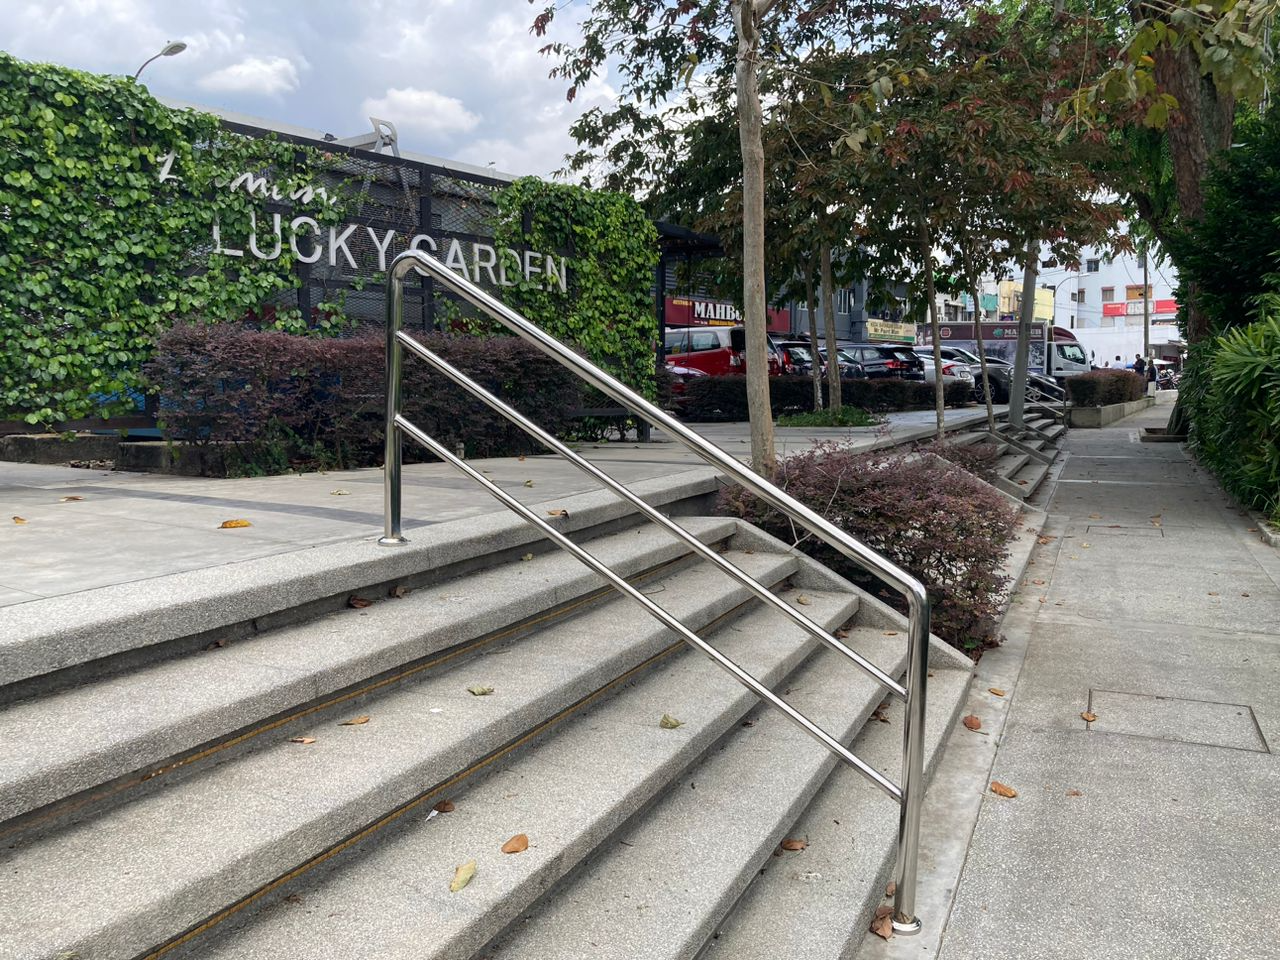 Handrails at Lucky Garden, Bangsar that were installed after Benedict Lopez made a complaint with the authorities. – MAITHILLI KALAISELVAN/The Vibes pic, April 26, 2023